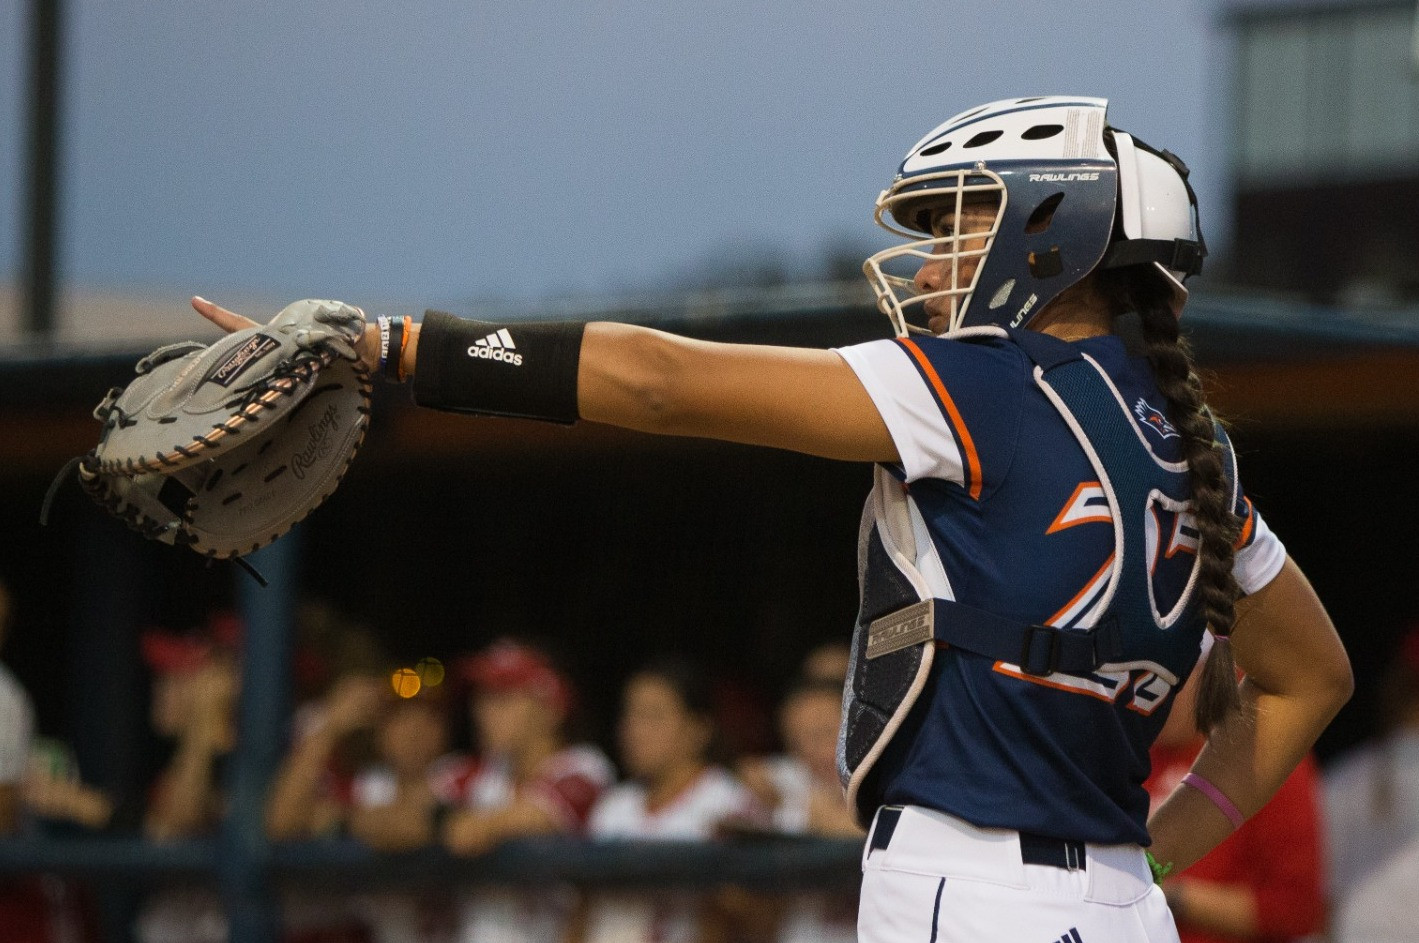 UTEP softball's late rally comes up short in loss to FIU